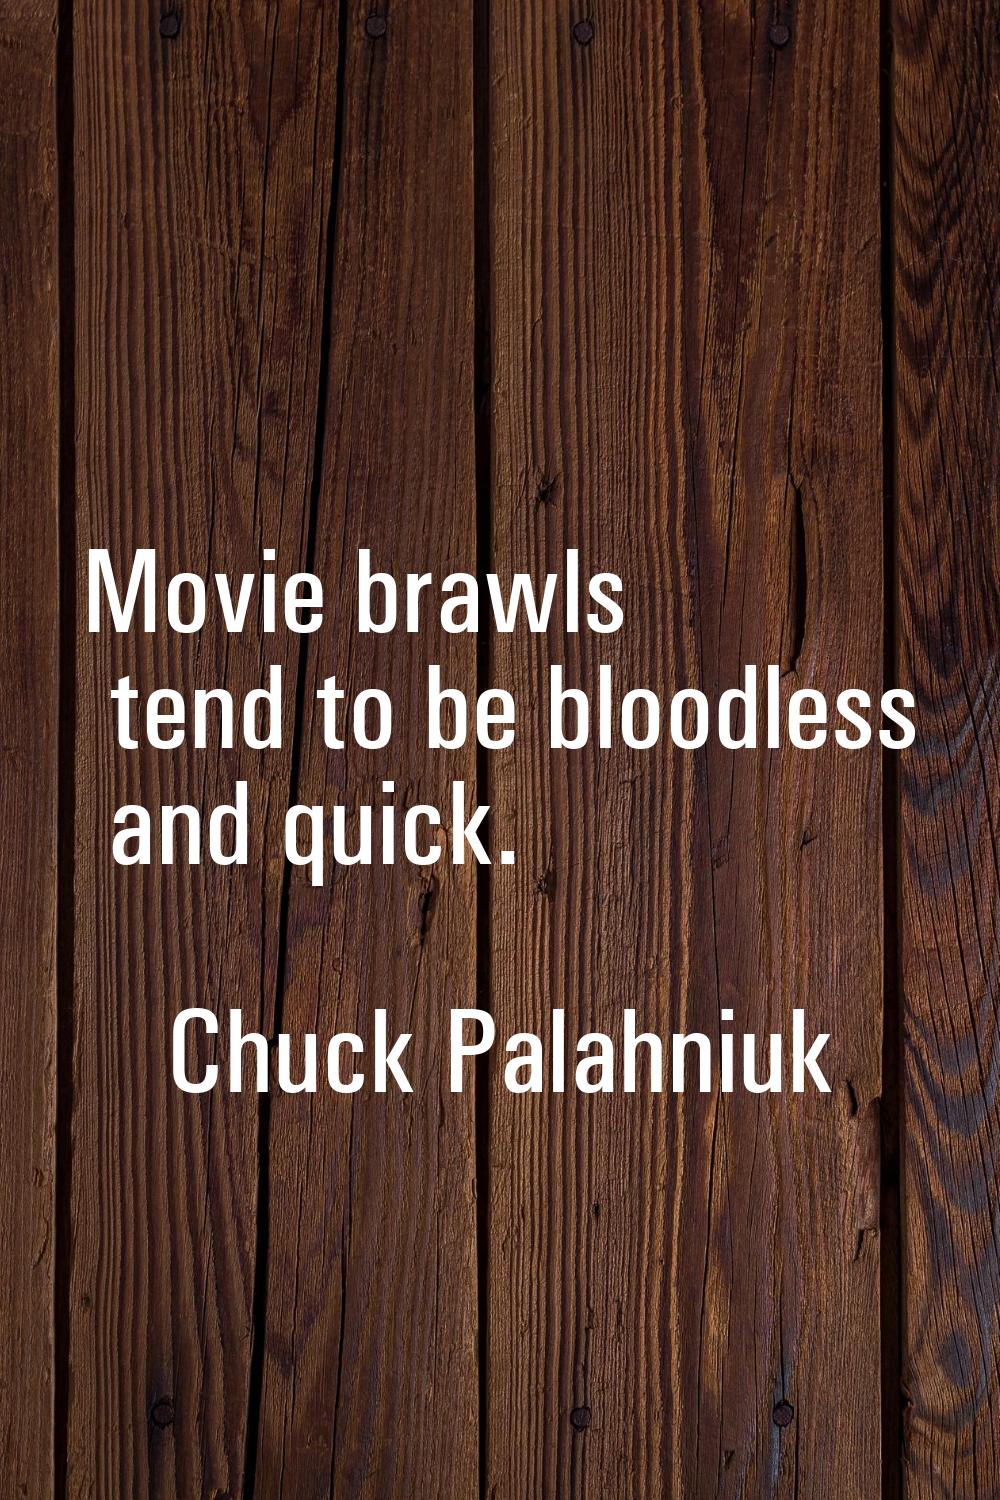 Movie brawls tend to be bloodless and quick.